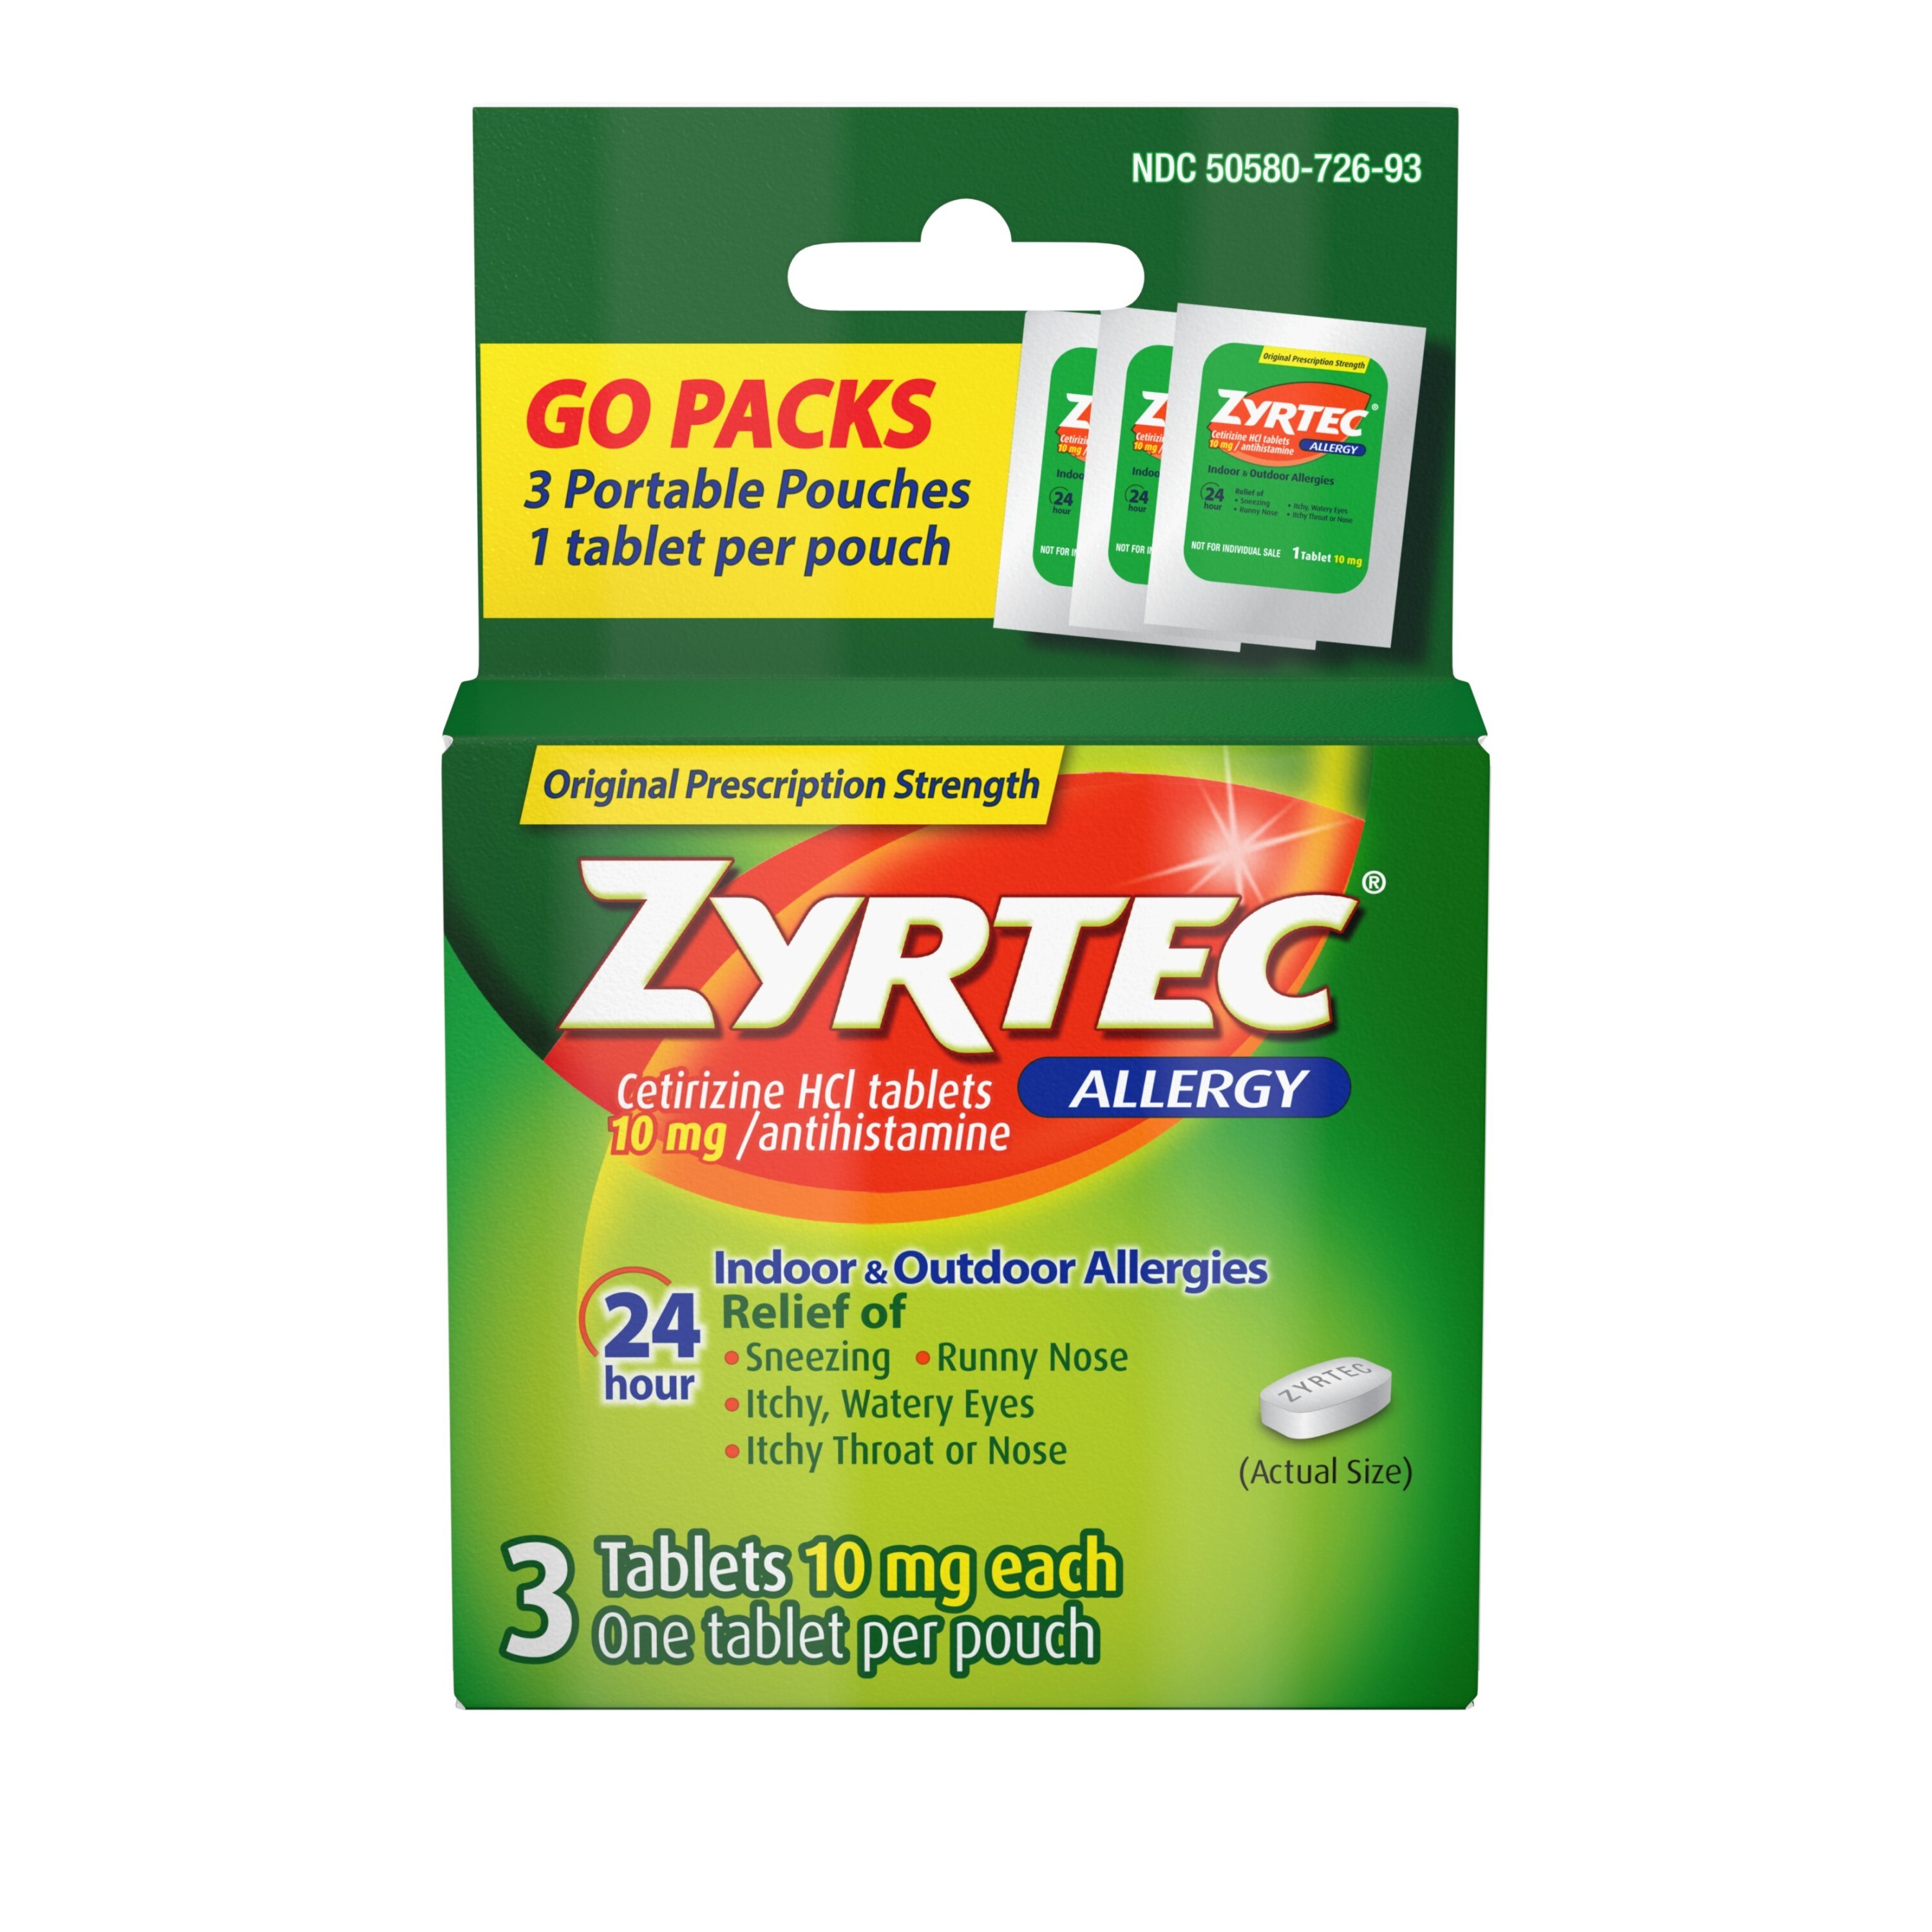 Zyrtec 24 Hour Allergy Tablets with Cetirizine HCl, Travel Size, 3 CT